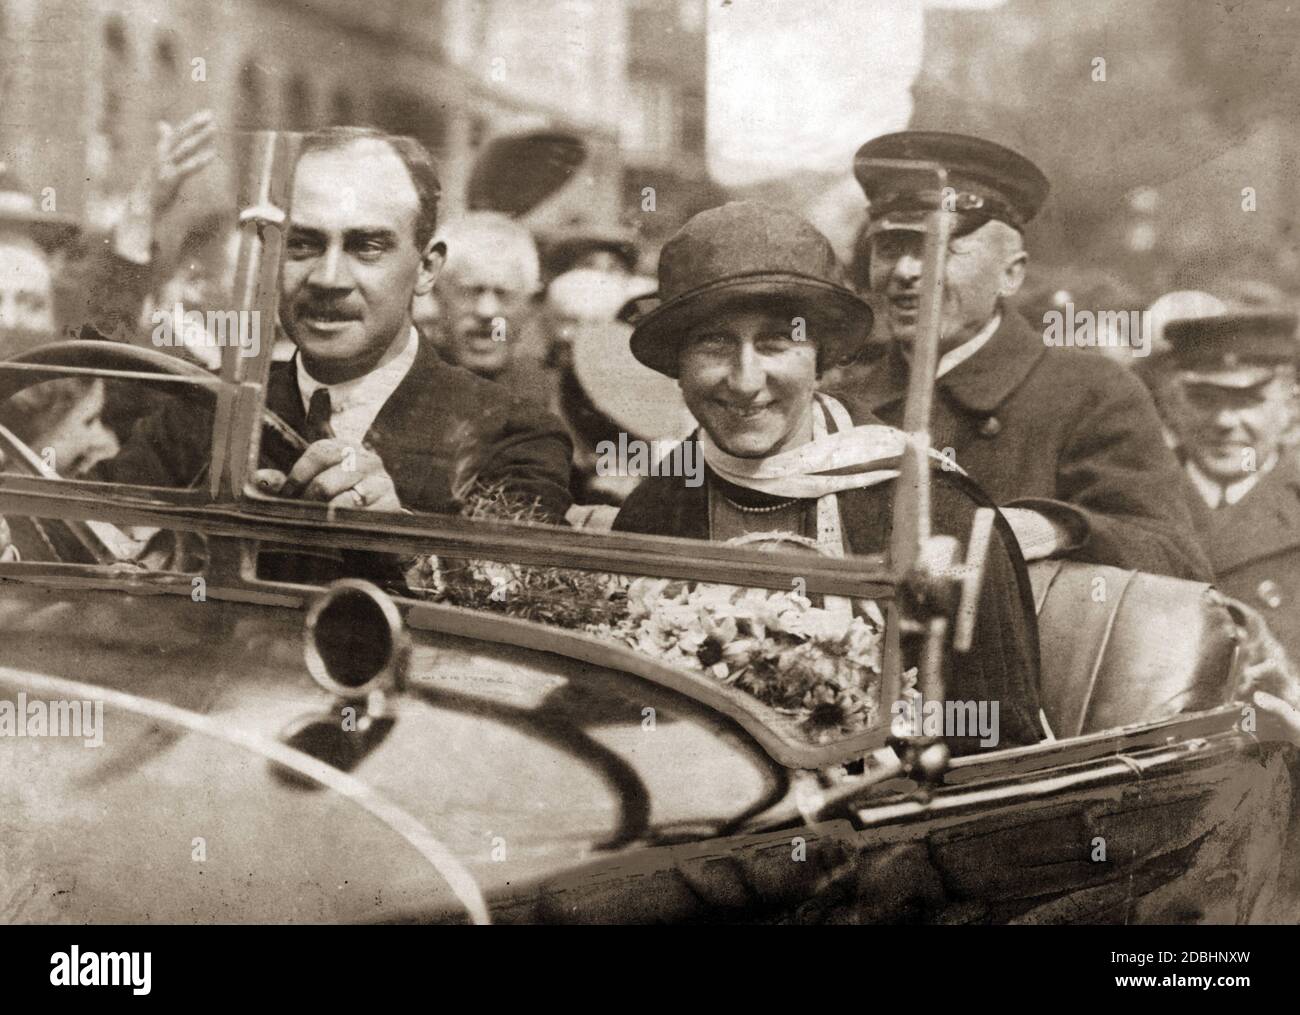 Duke Ernst August III of Brunswick and Duchess Victoria Louise (nee Prussia) drive in a car and are greeted by a crowd of people. Photo taken in 1924. Stock Photo